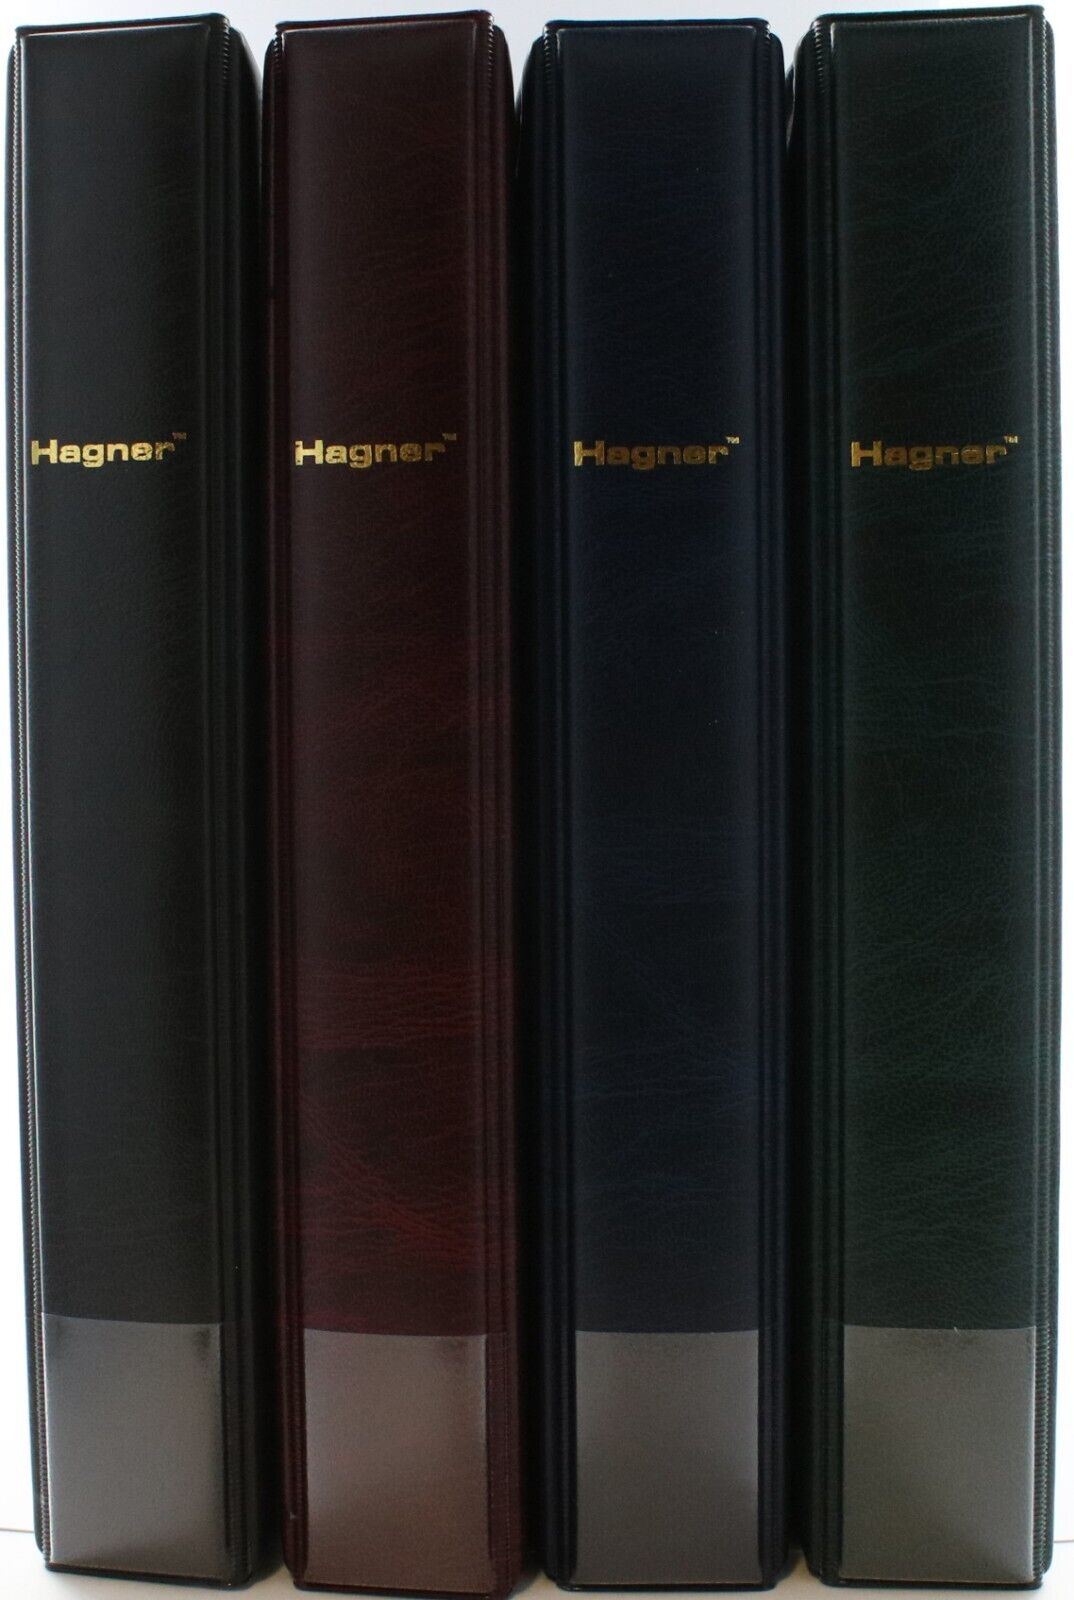 Hagner Albums or DOUBLE Sided Pages various strips